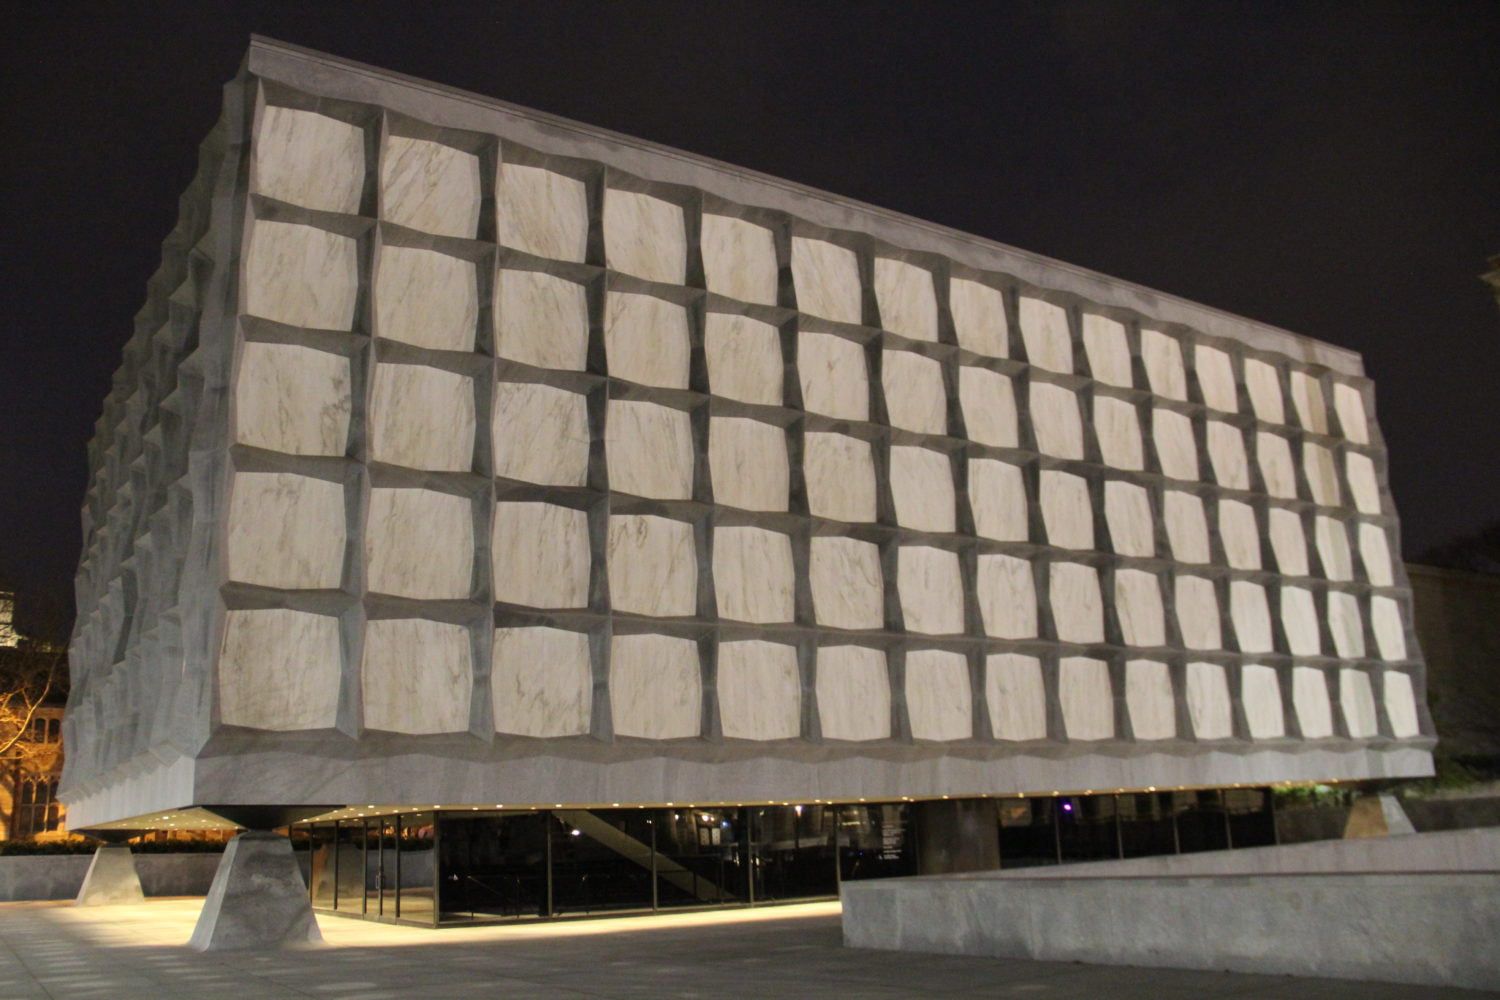 Beinecke Library At Night